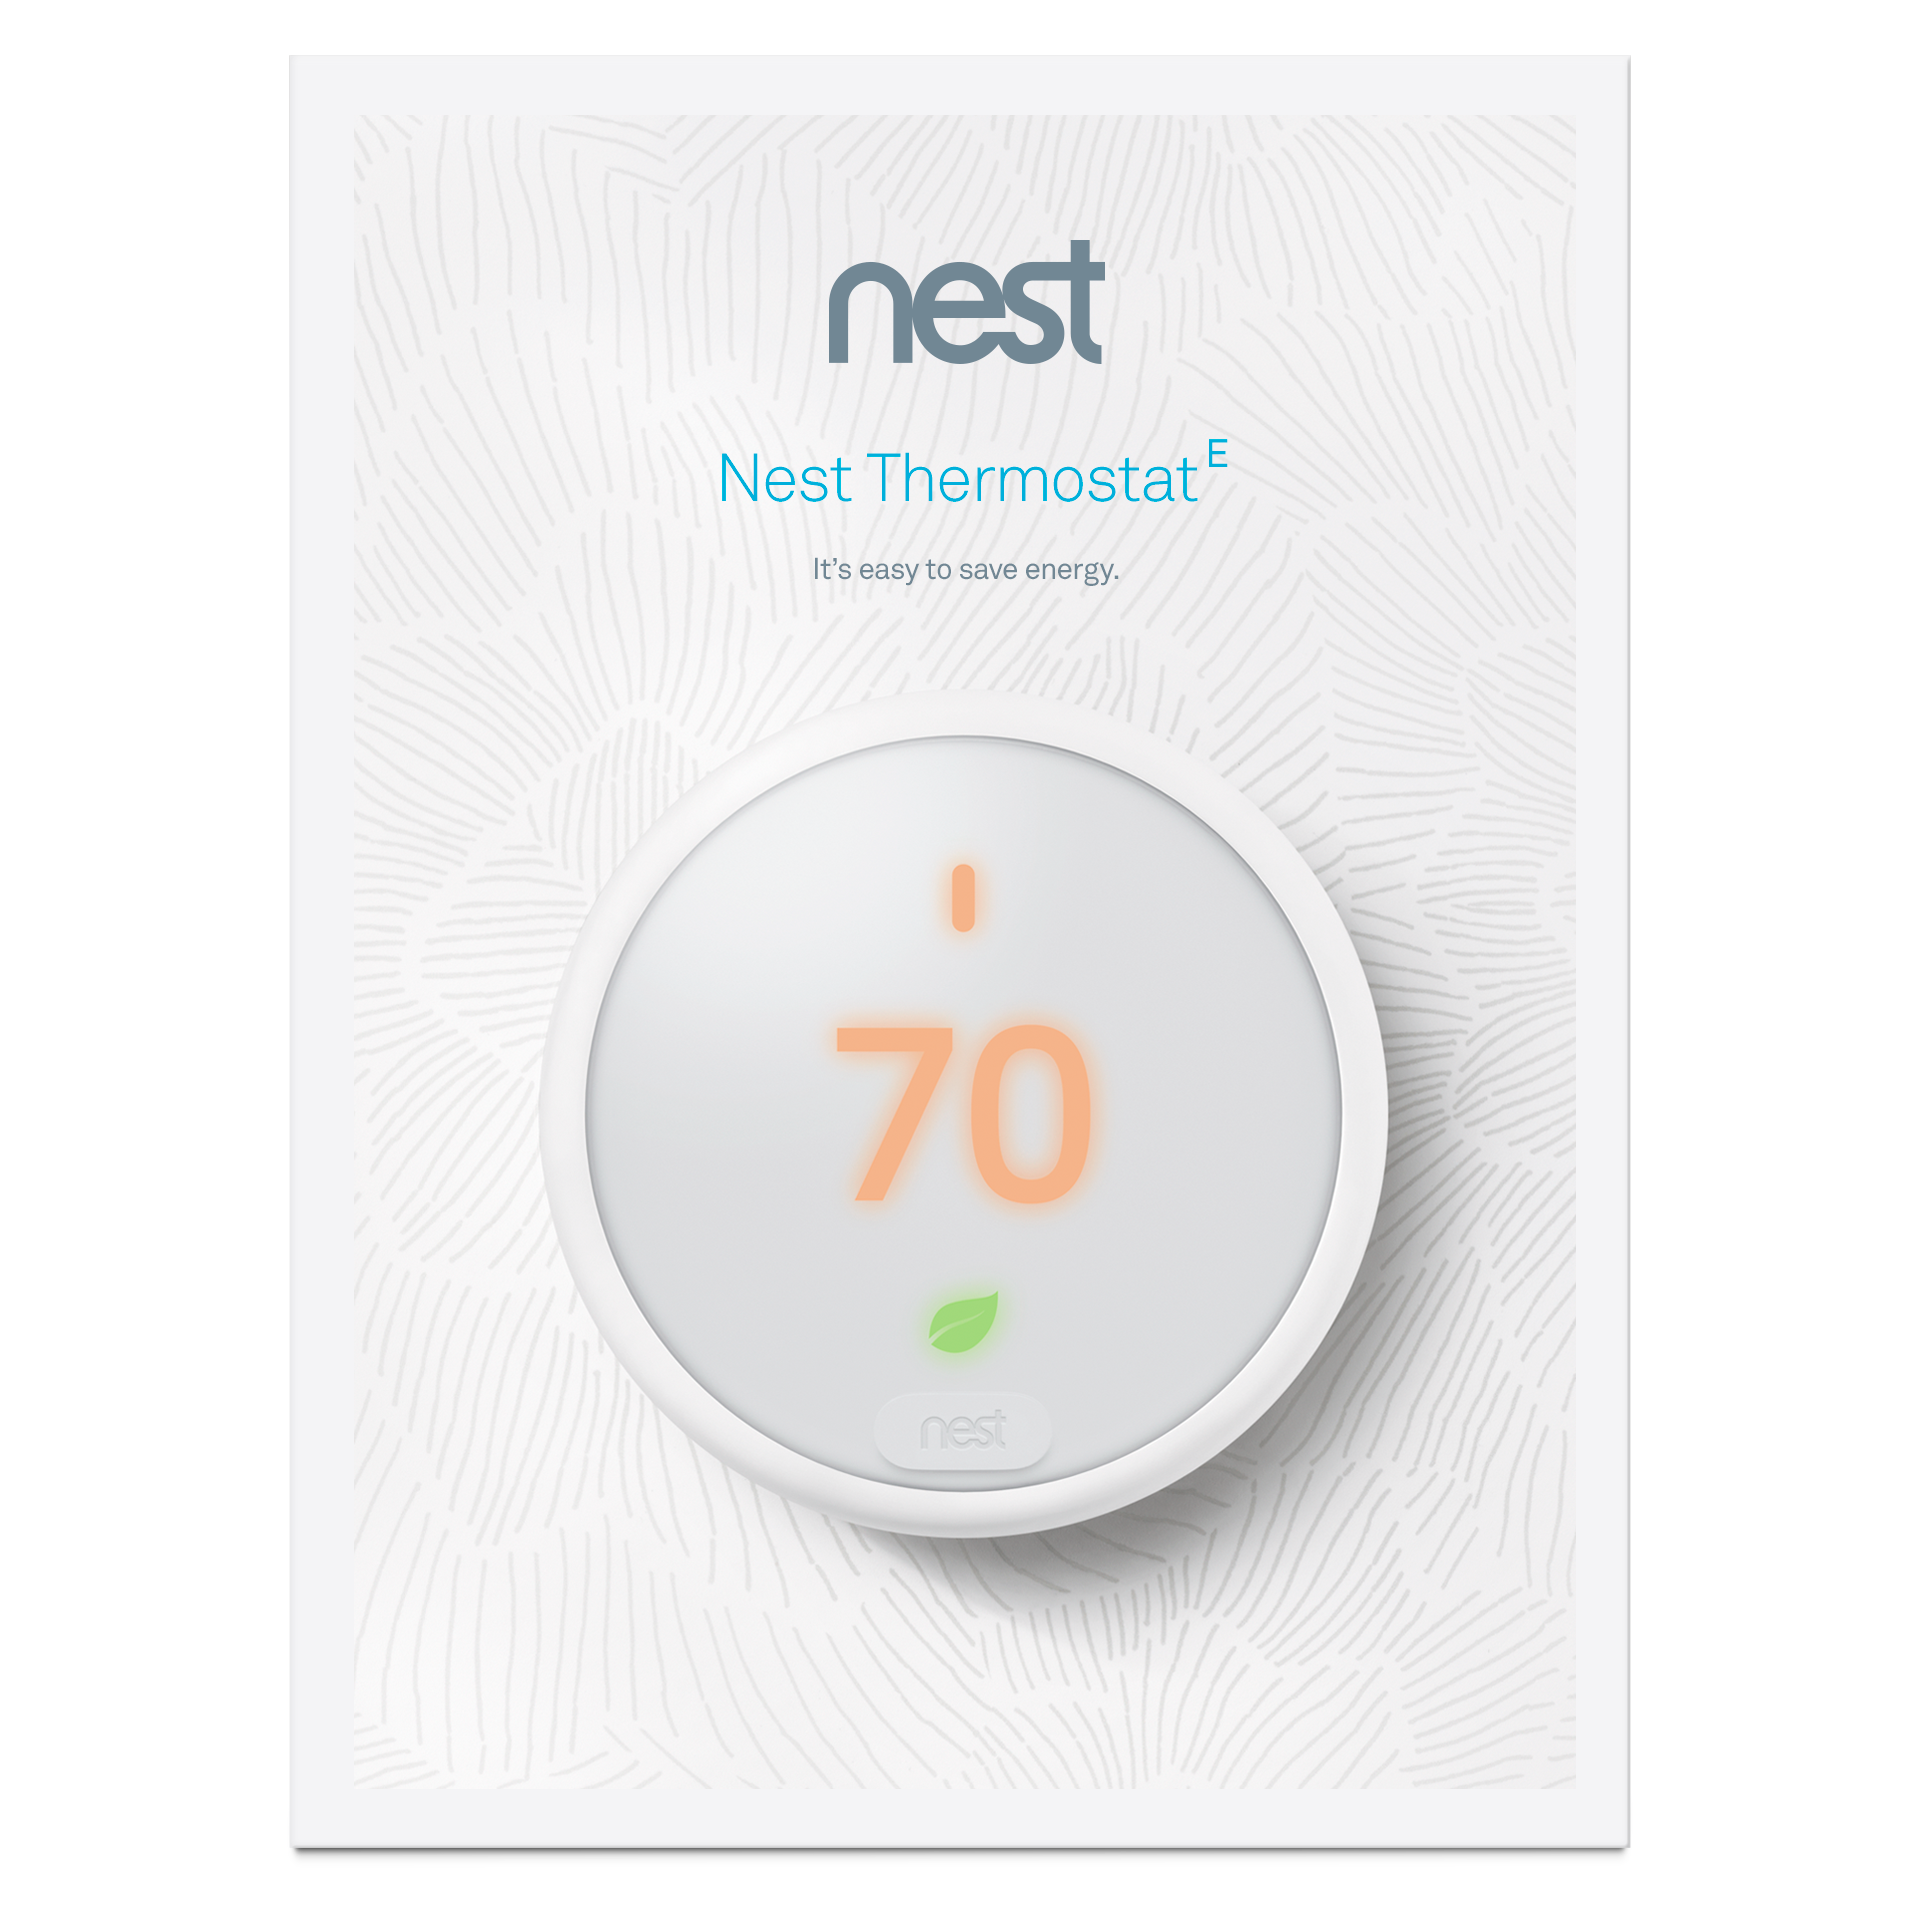 Google Nest Thermostat E in White - image 2 of 5